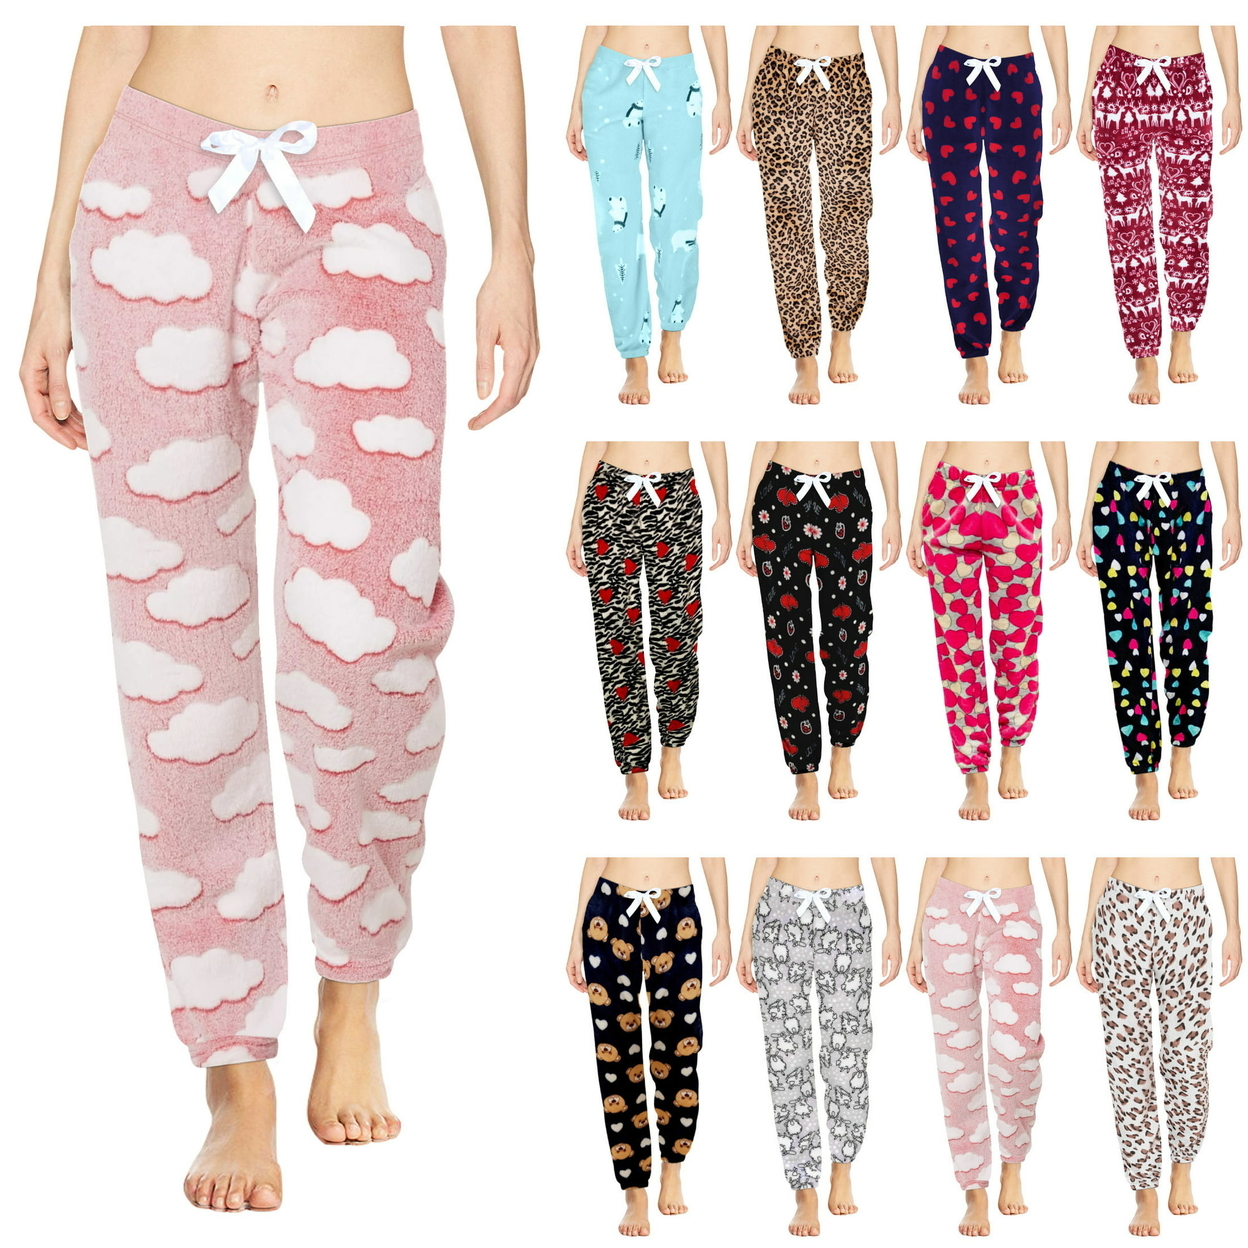 4-Pack: Women's Solid & Printed Ultra-Soft Comfy Stretch Micro-Fleece Pajama Lounge Pants - Xx-large, Shapes